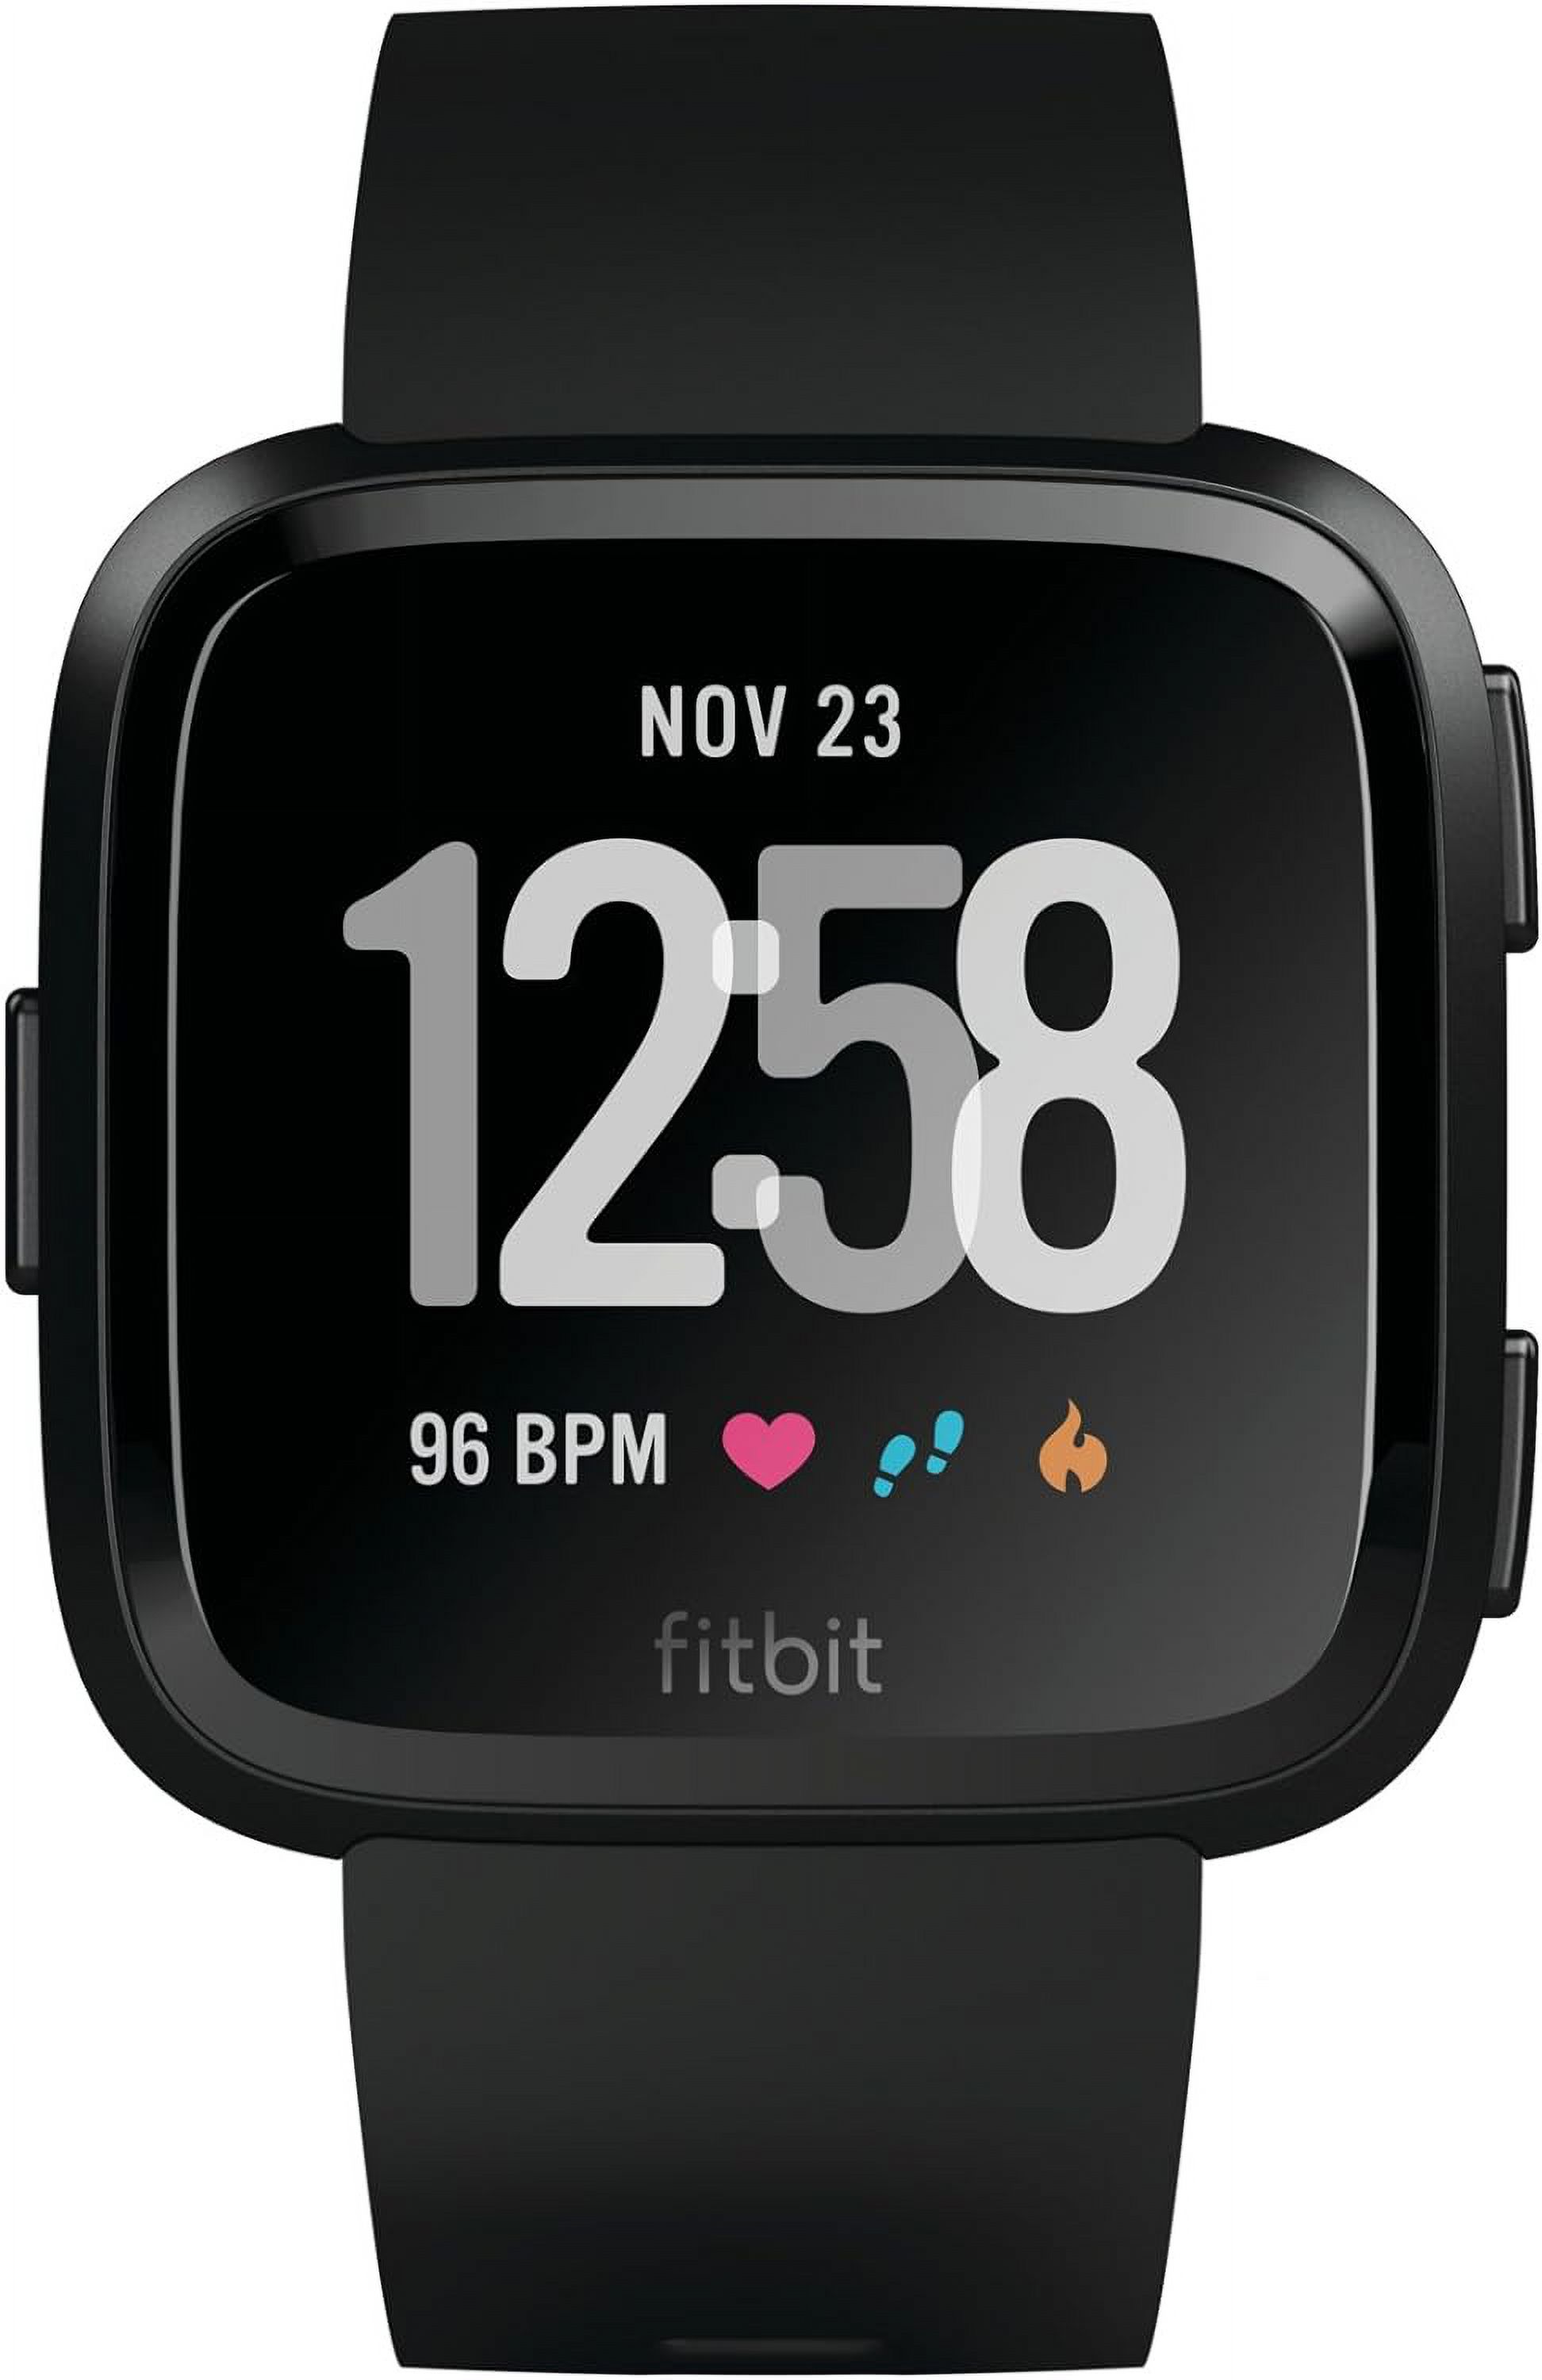 Fitbit Versa Smart Watch, Black/Black Aluminium, One Size (S & L Bands Included) - image 3 of 11